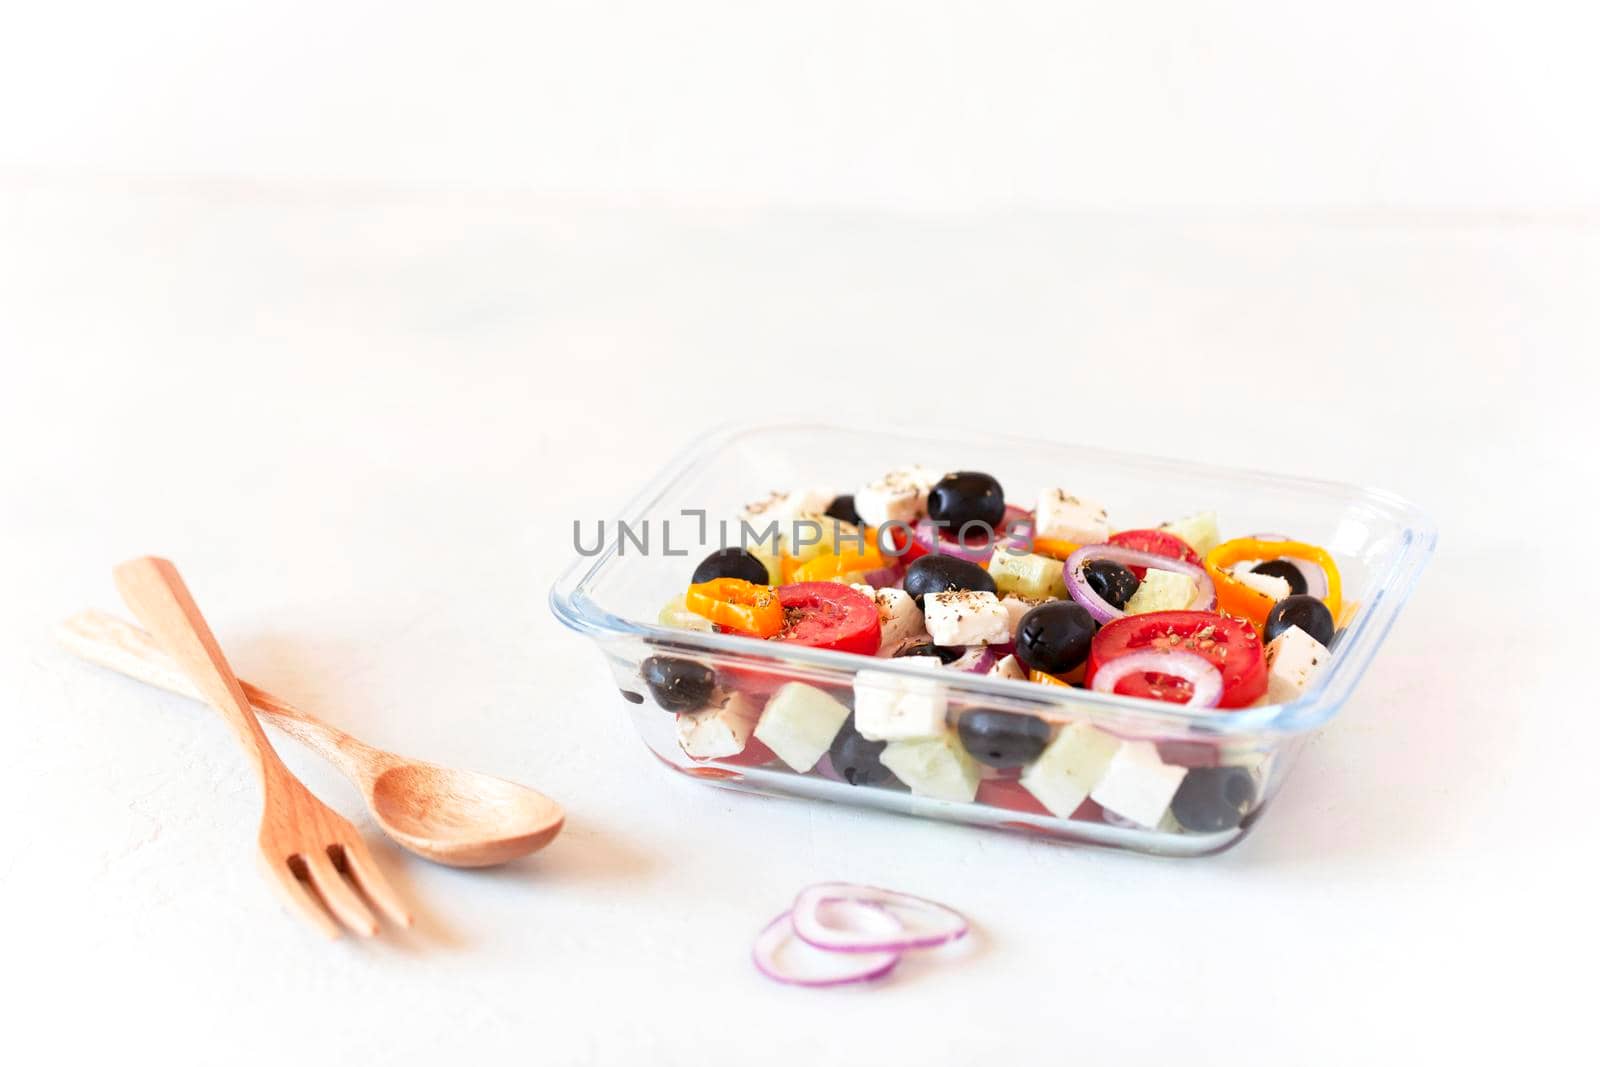 lunch box with greek salad, reusable glass container, wooden cutlery, on white background, side view